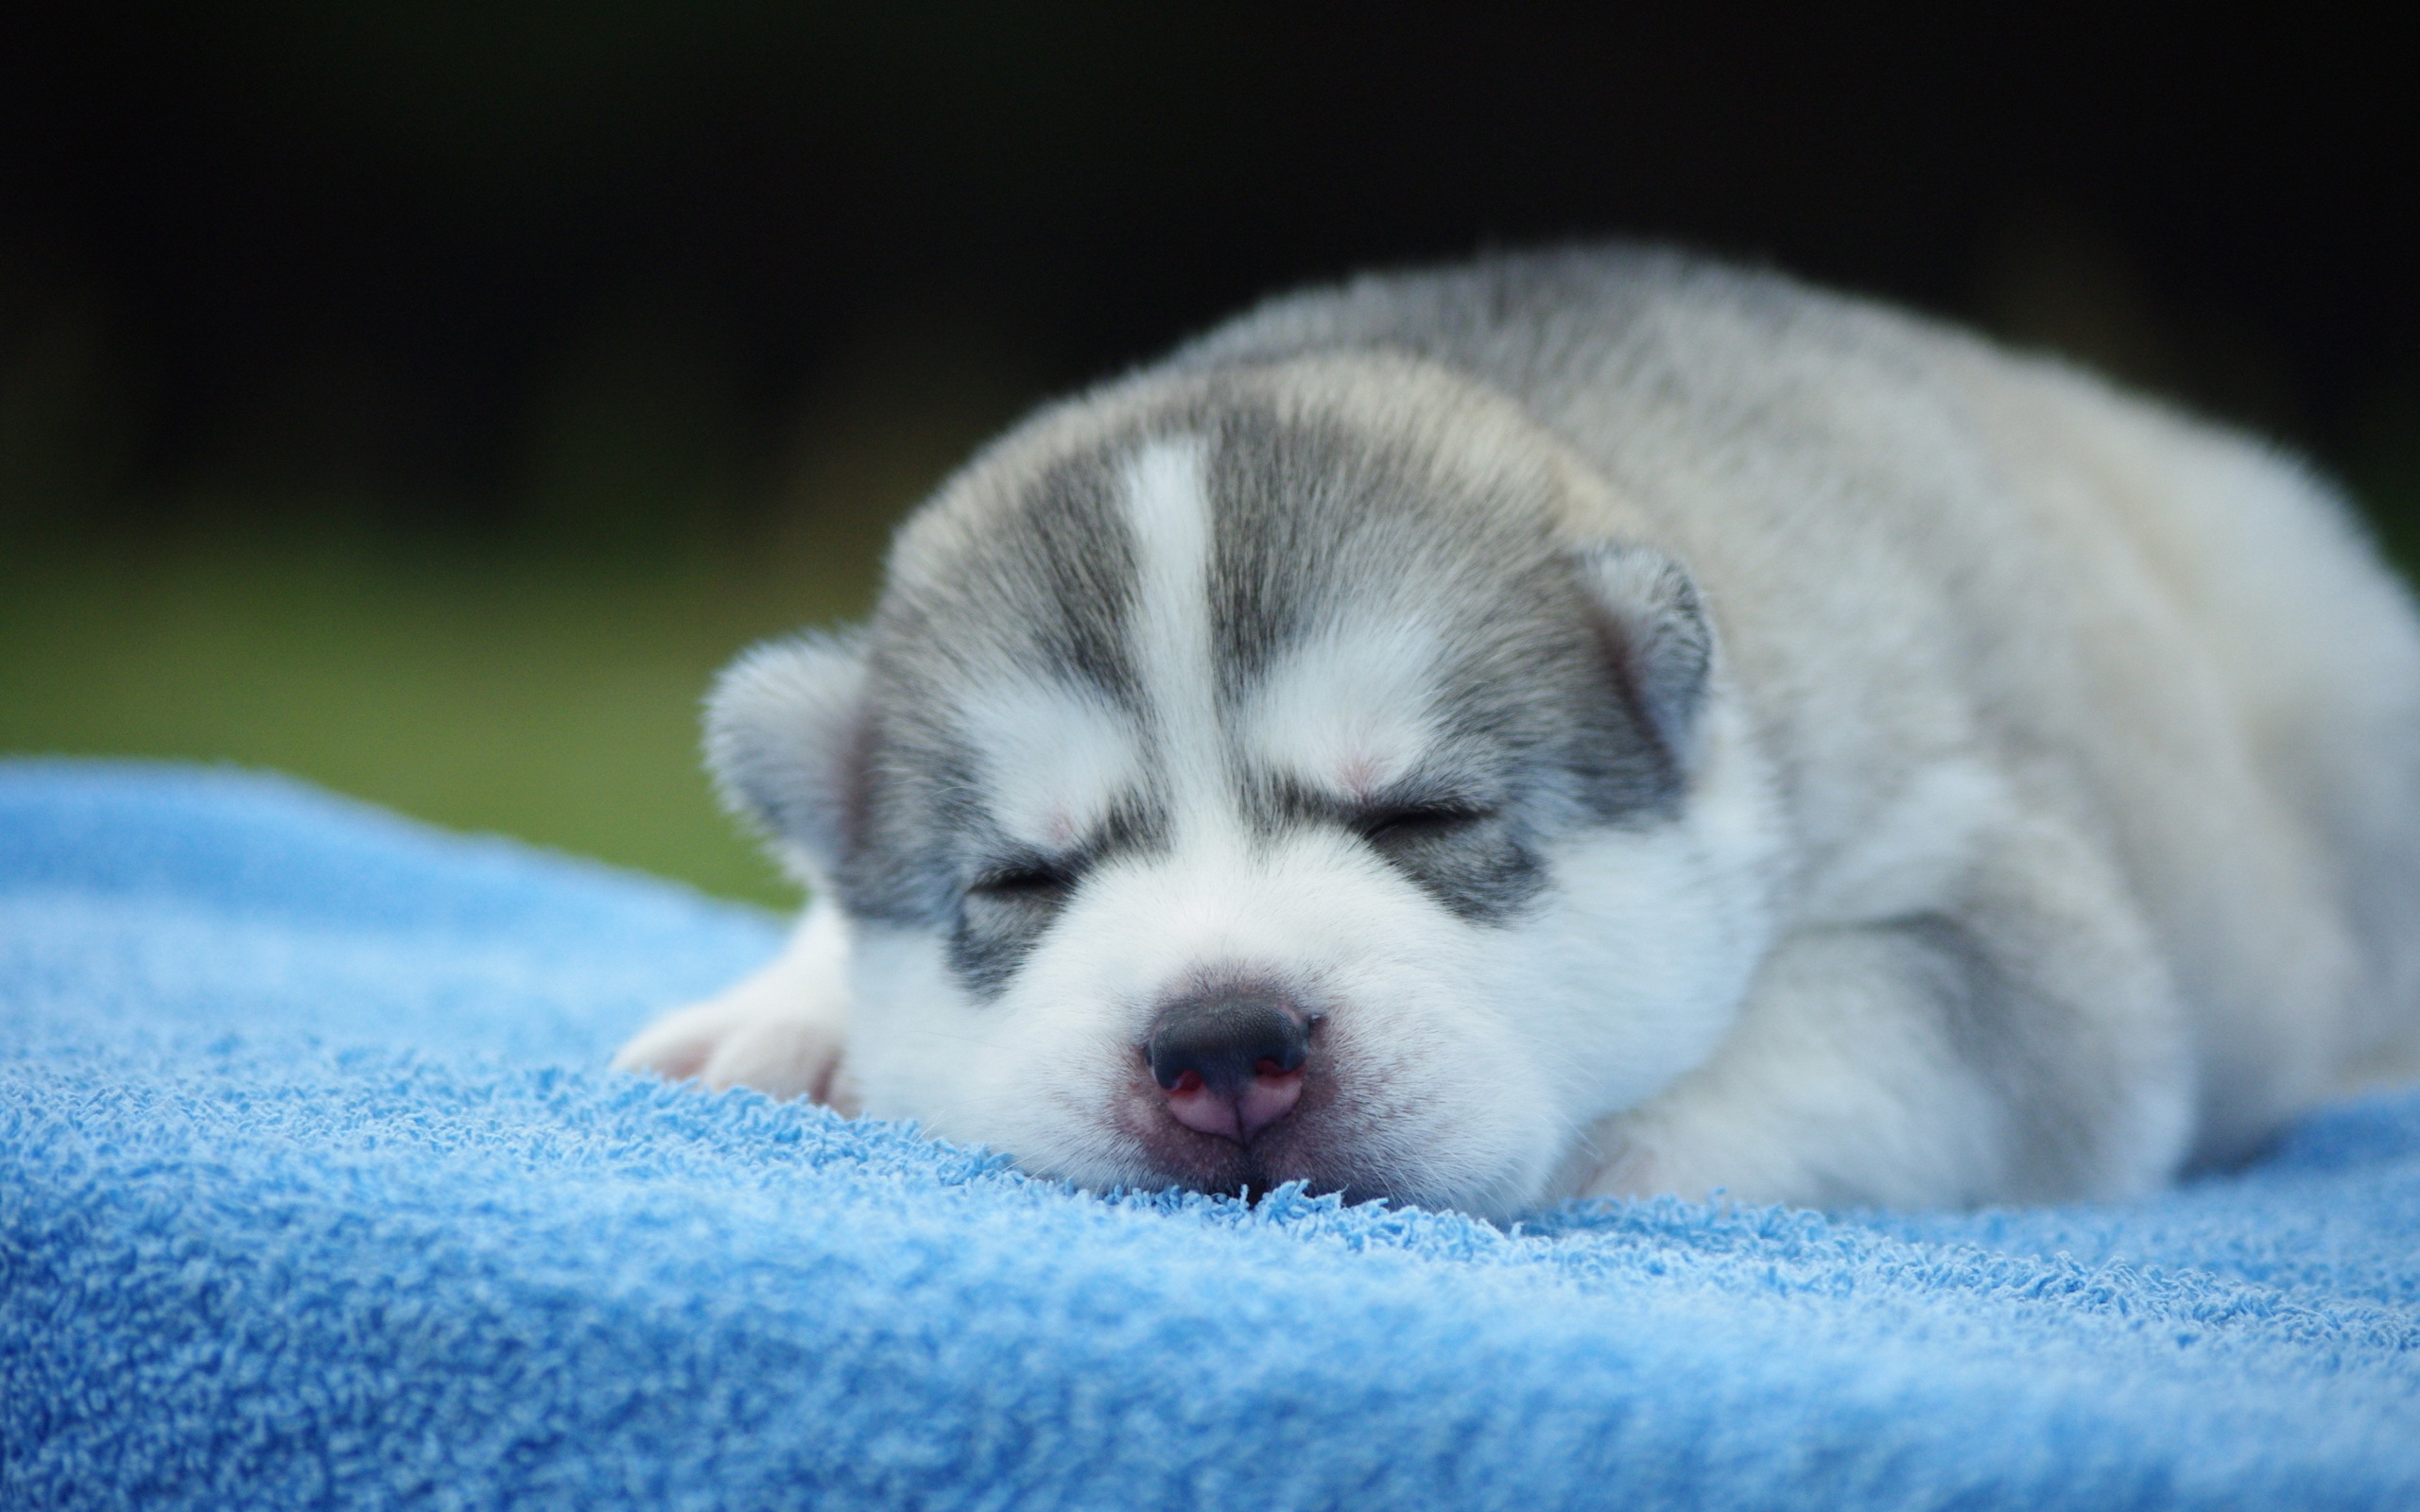 Free download wallpaper Dogs, Dog, Animal, Puppy, Sleeping on your PC desktop